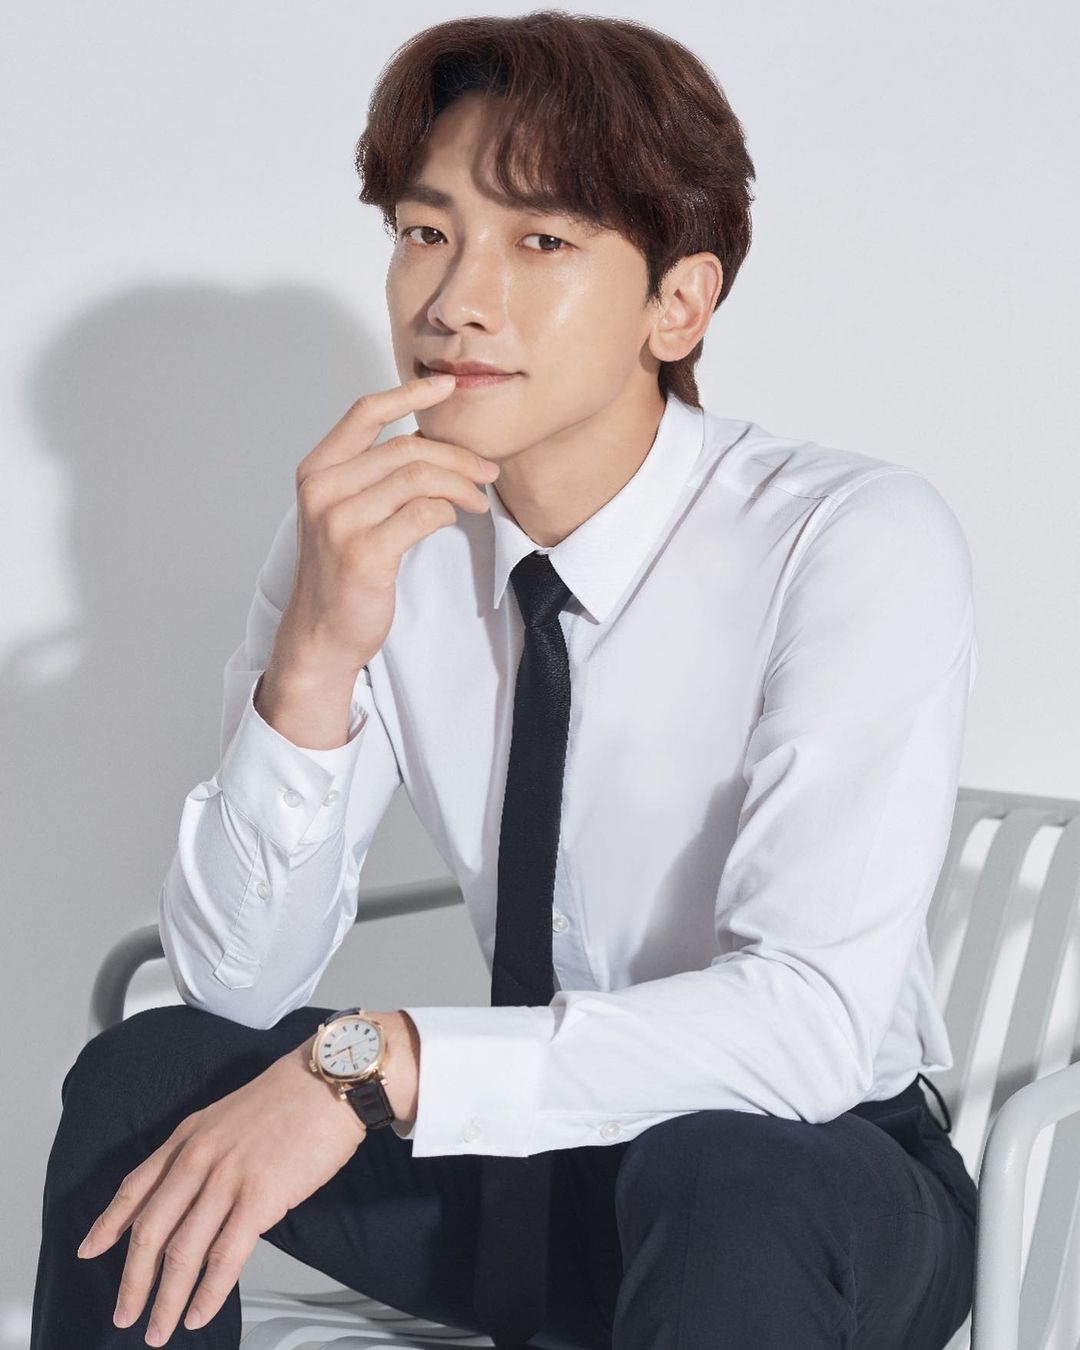 Rain earns US$26 million by selling his Tag's Construction